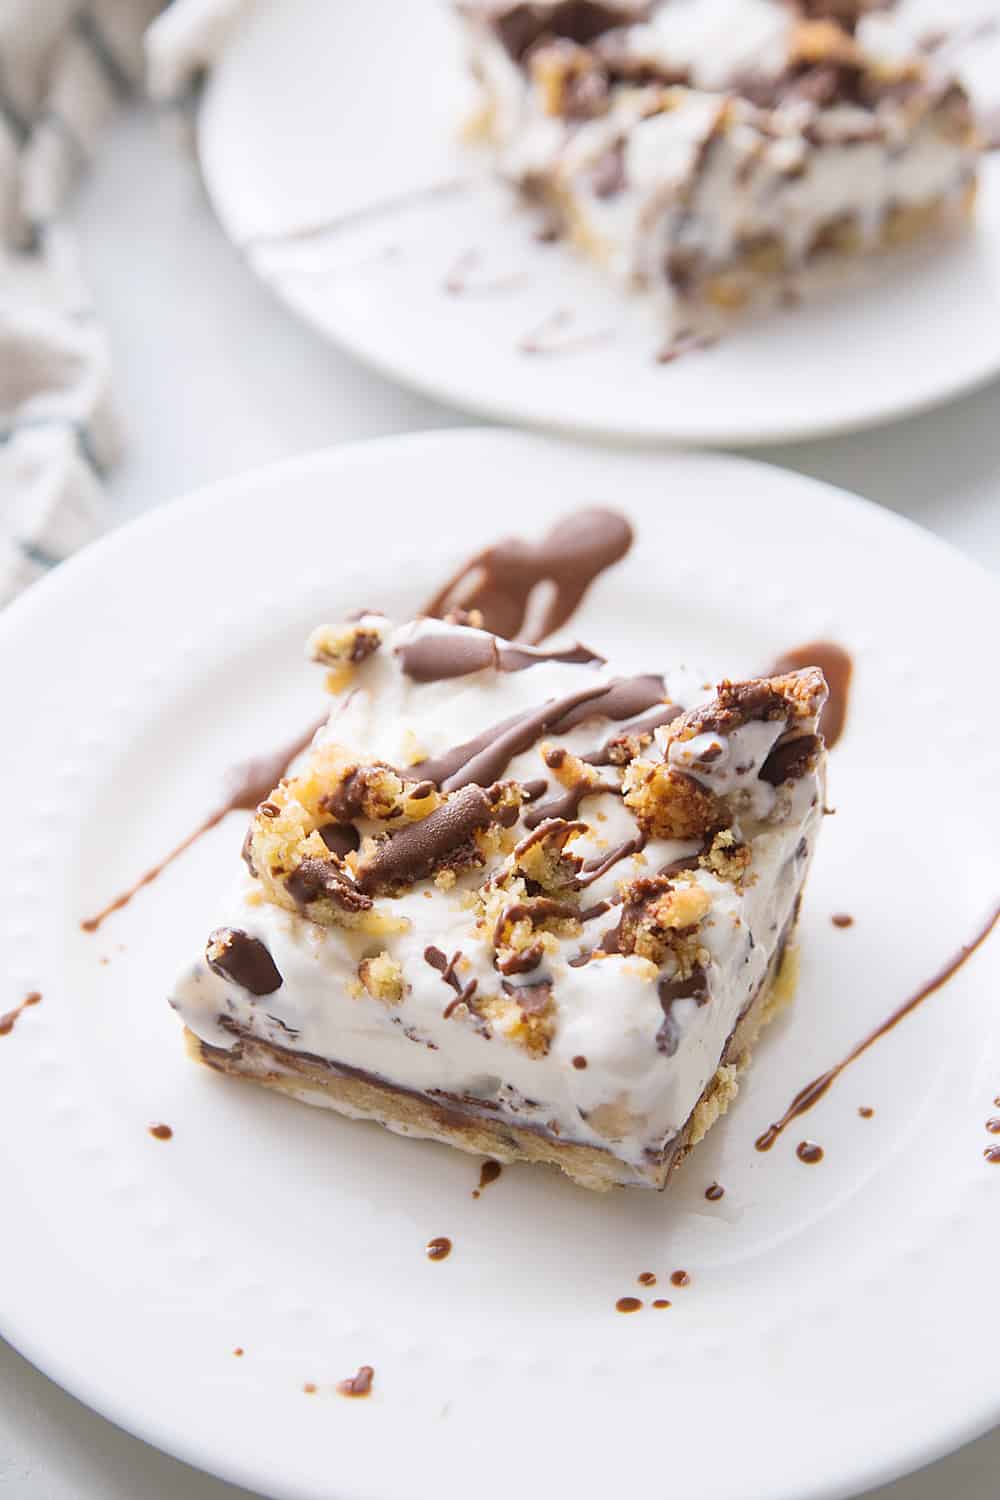 Chocolate Chip Cookie Ice Cream Cake -- Impress guests and taste buds with this chocolate chip cookie ice cream cake. So many layers of scrumptious flavors&Mdash;what's not to love? #icecream #cookie #icecreamcake #dessert #easydessert #dessertrecipe #chocolatechipcookie #halfscratched #baking